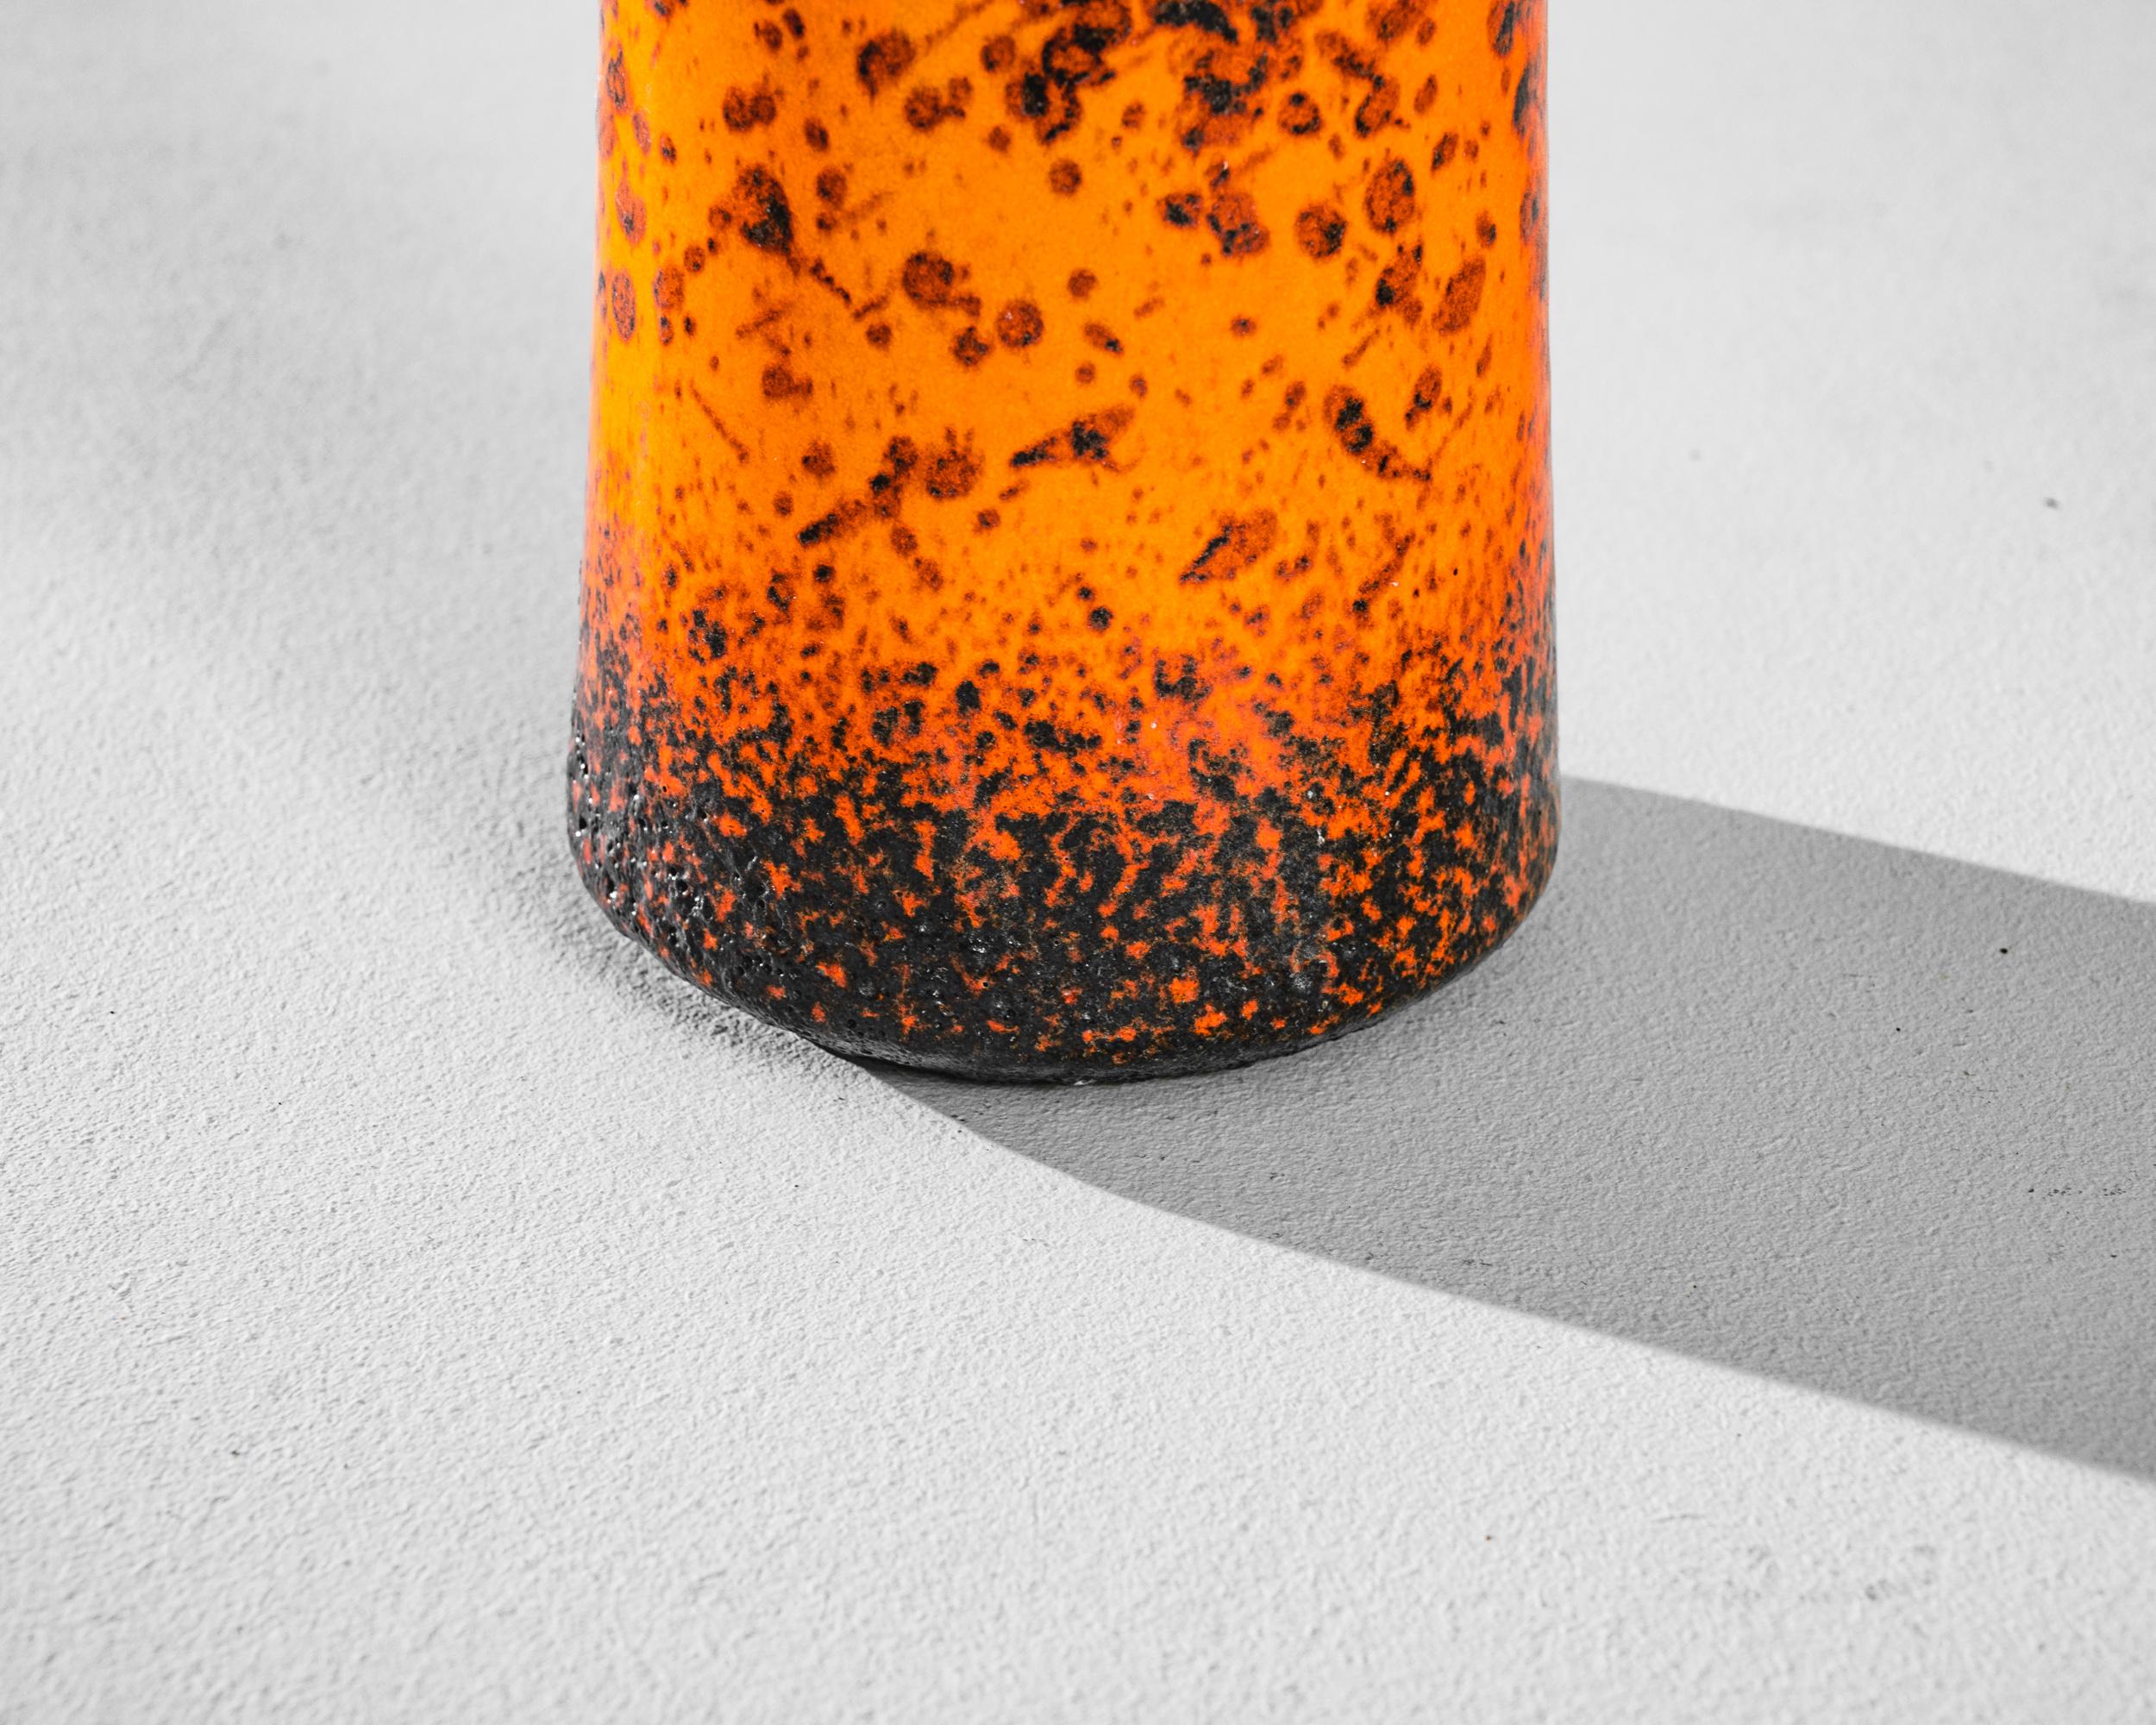 Immerse your space in the vibrant spirit of the 1960s with this German ceramic vase. The lively orange hue sets an energetic tone, while the playful black splatter paint creates a dynamic and artistic effect across the surface. The strategic